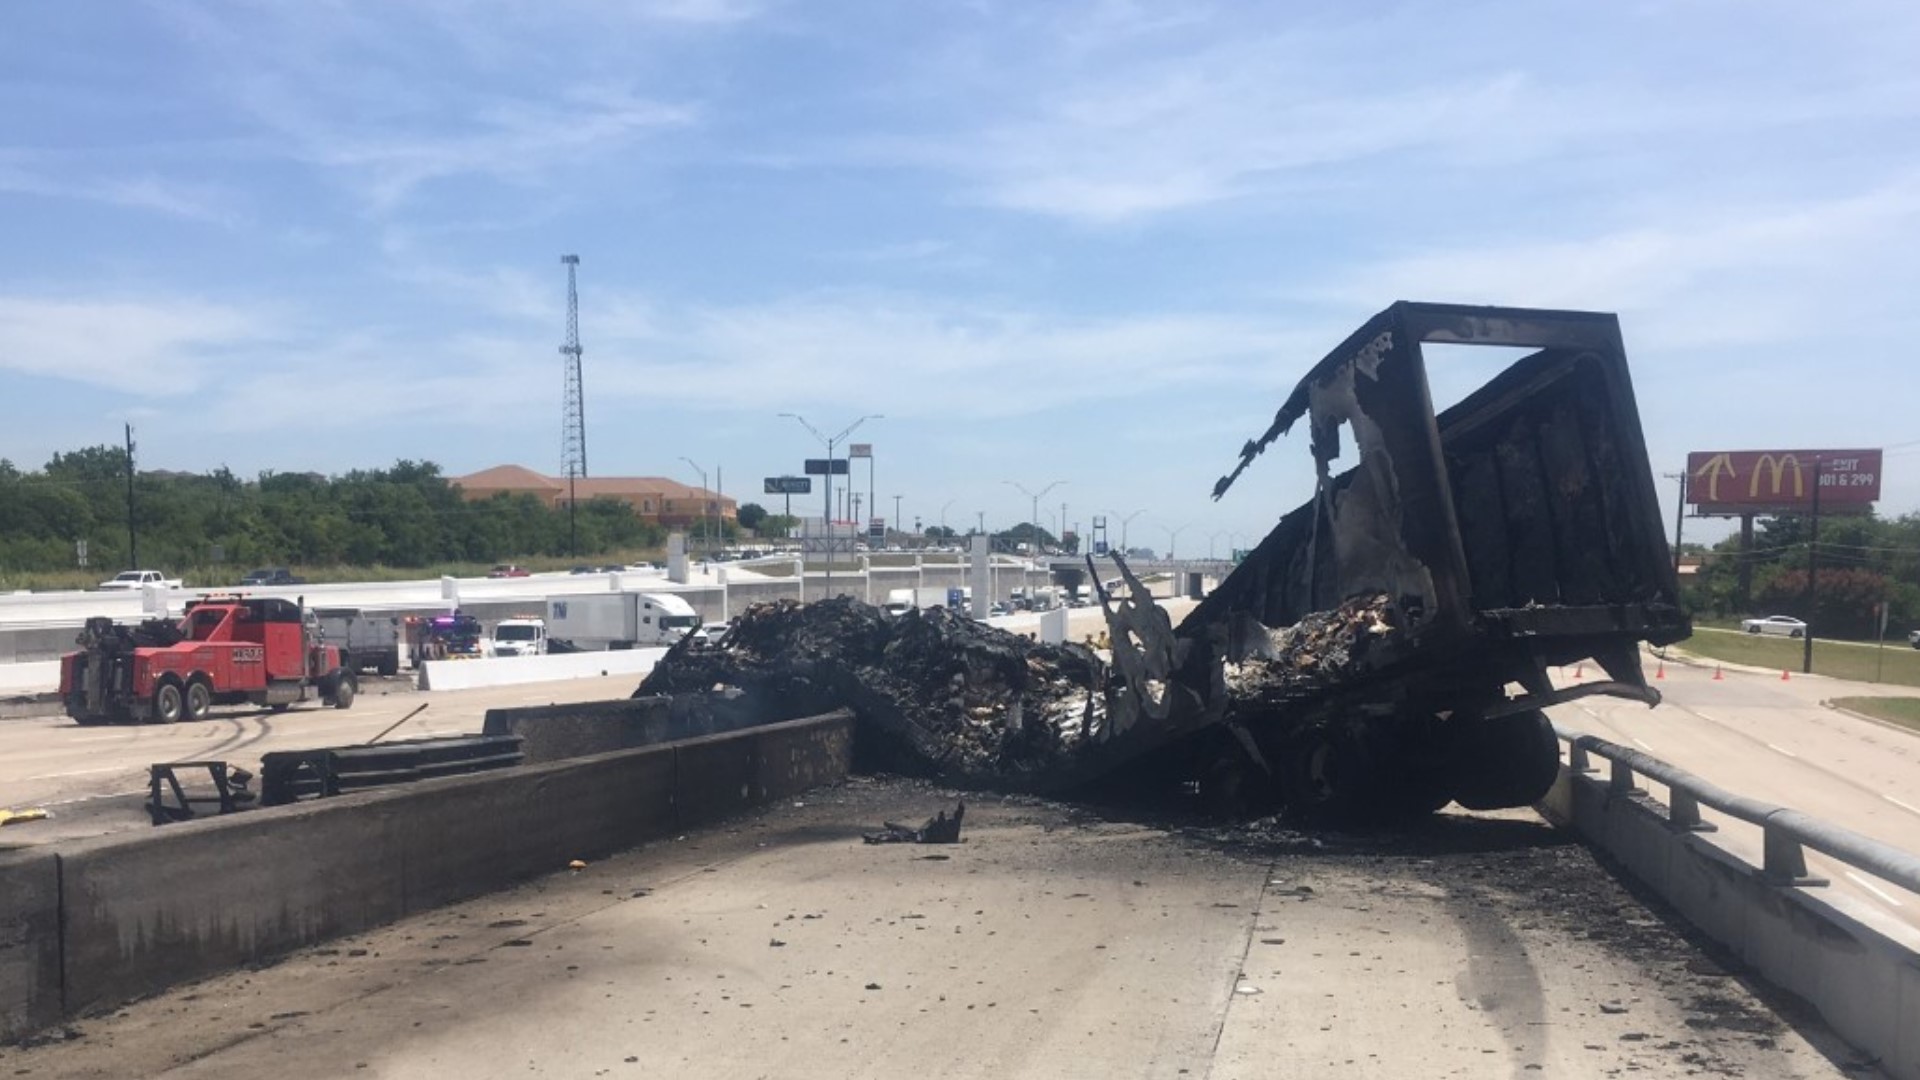 Traffic experienced major delays Sunday afternoon after eight vehicles, including two semi-trucks, collided on I-35 in Temple.